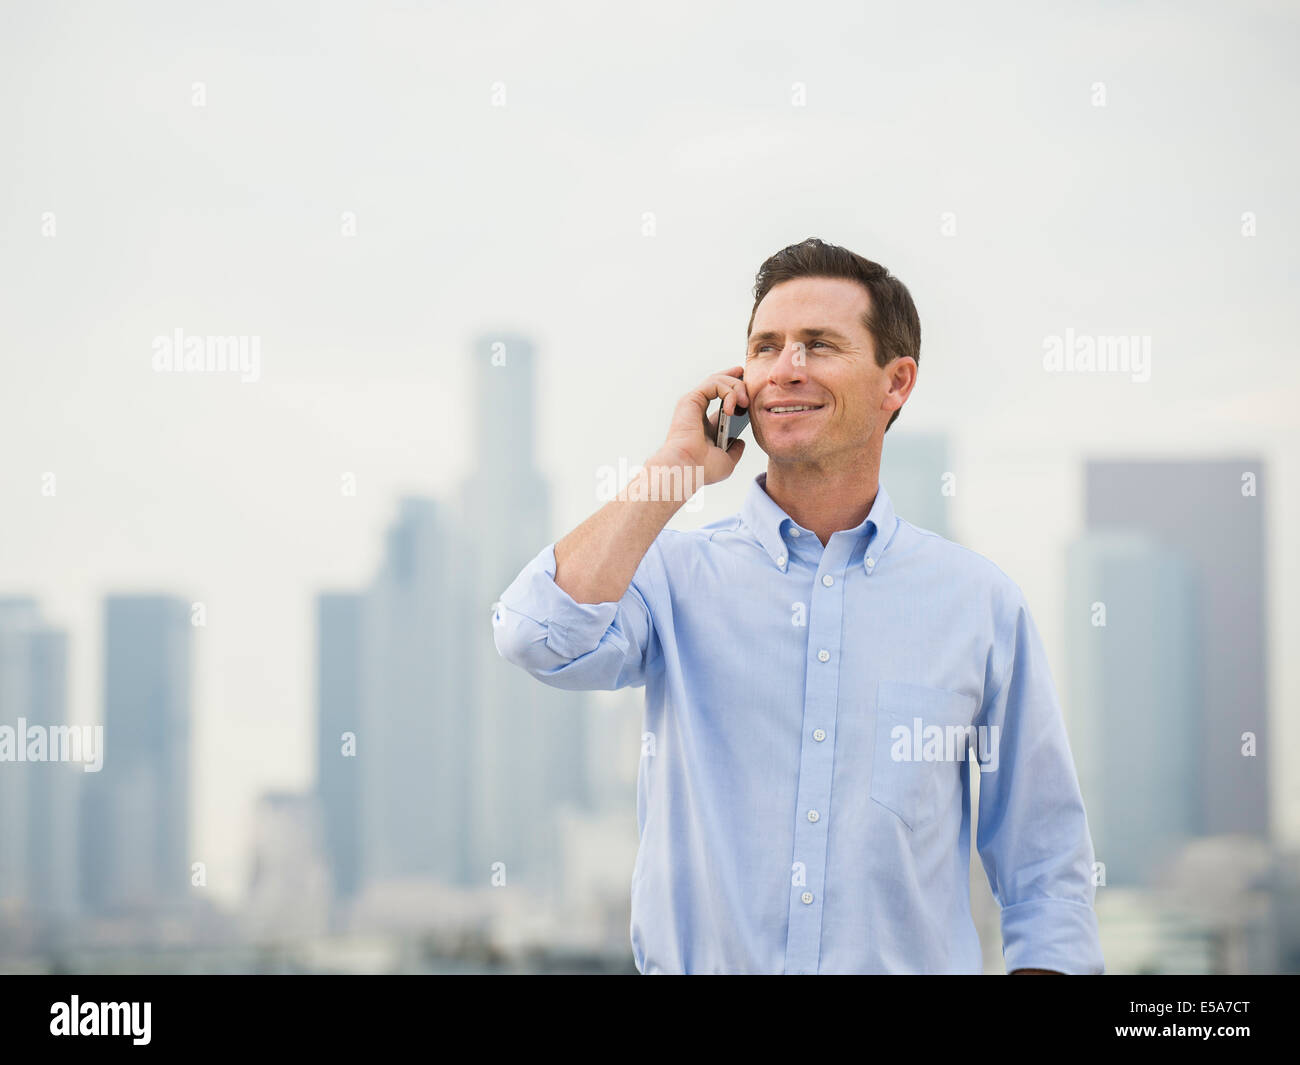 Caucasian businessman on cell phone on urban rooftop Banque D'Images